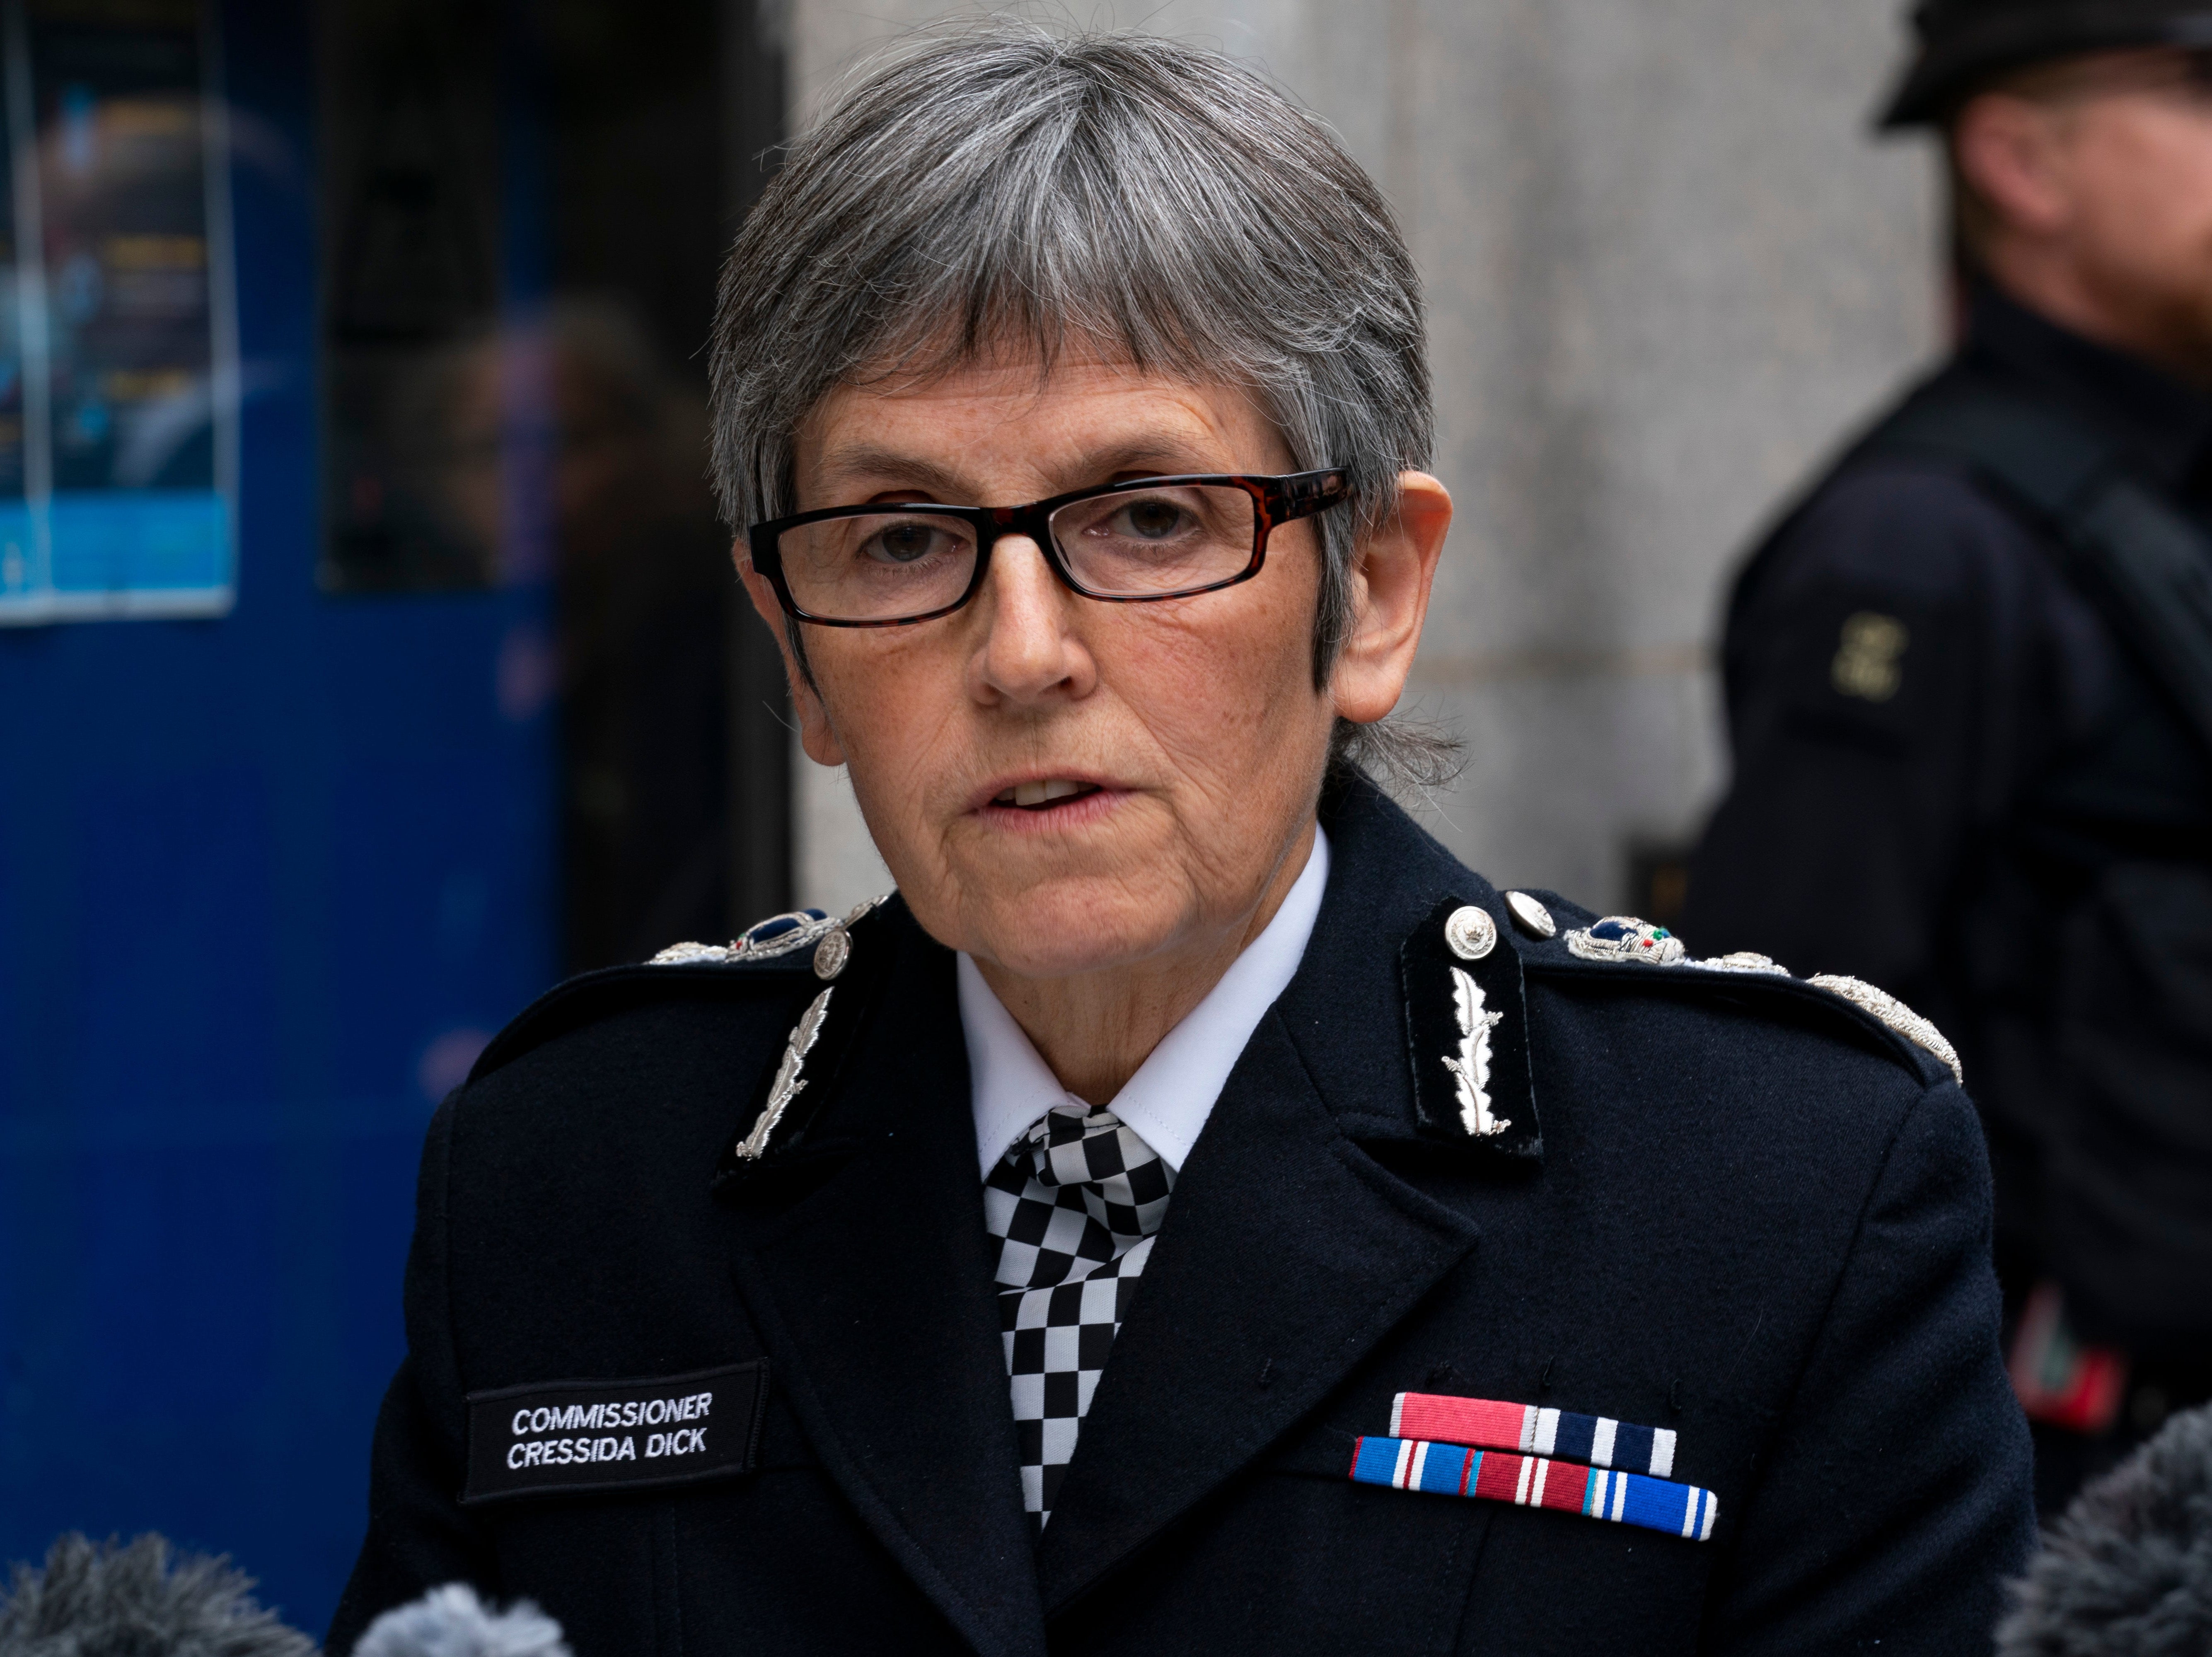 Metropolitan Police Commissioner Dame Cressida Dick has said the force’s plain clothes officers will video call into a control room for verification when stopping women following Sarah Everard’s murder